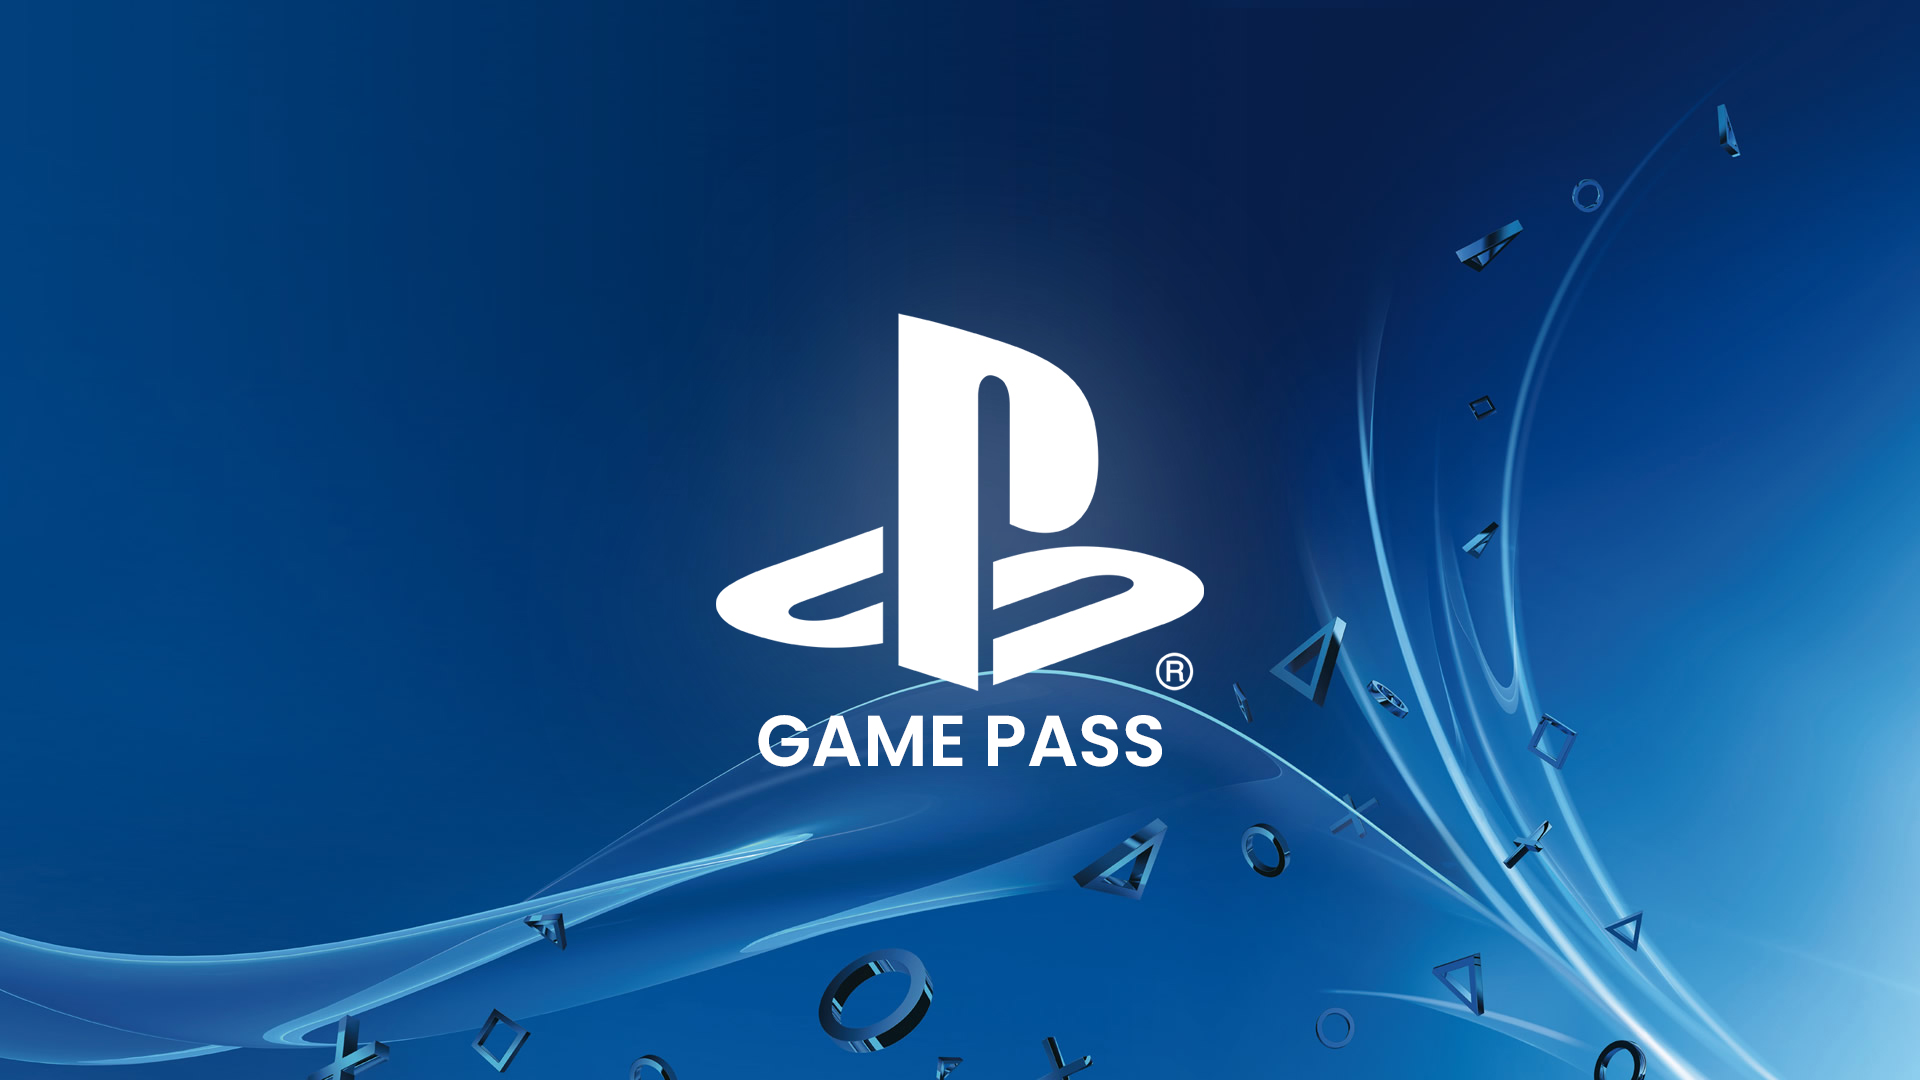 Playstation game pass